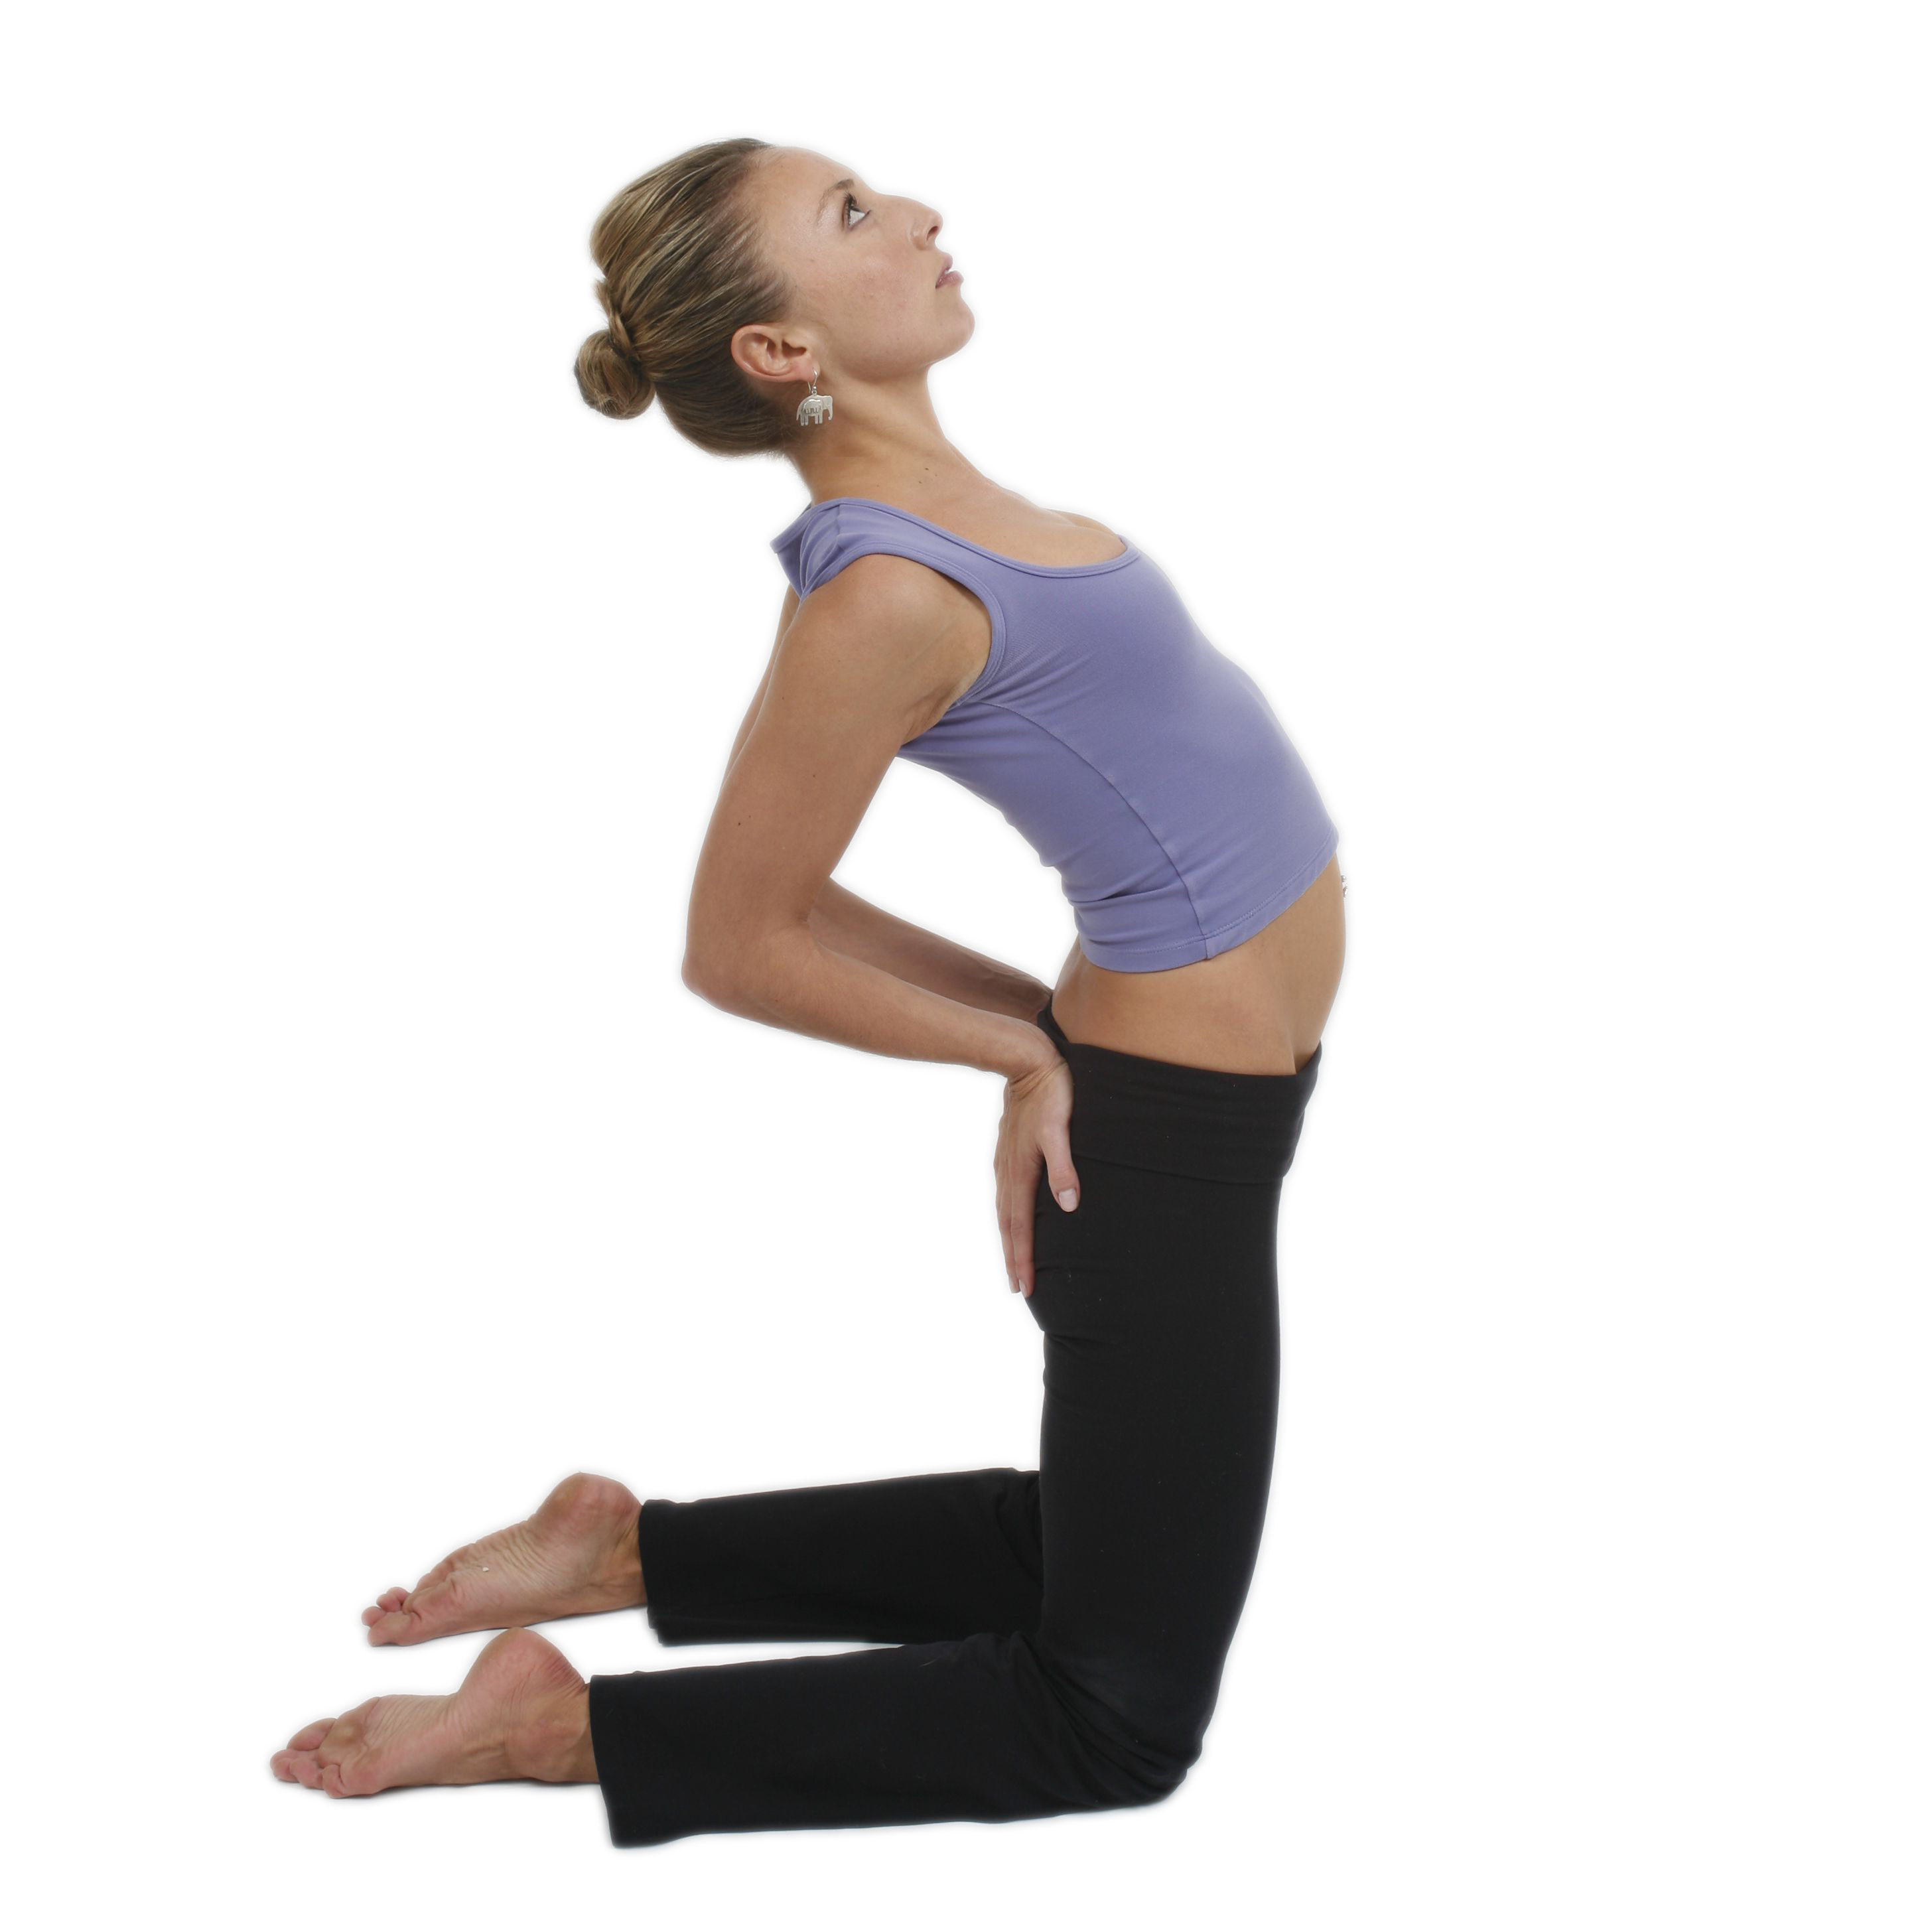 Camel Pose: Benefits, How To, and Form Tips | Well+Good